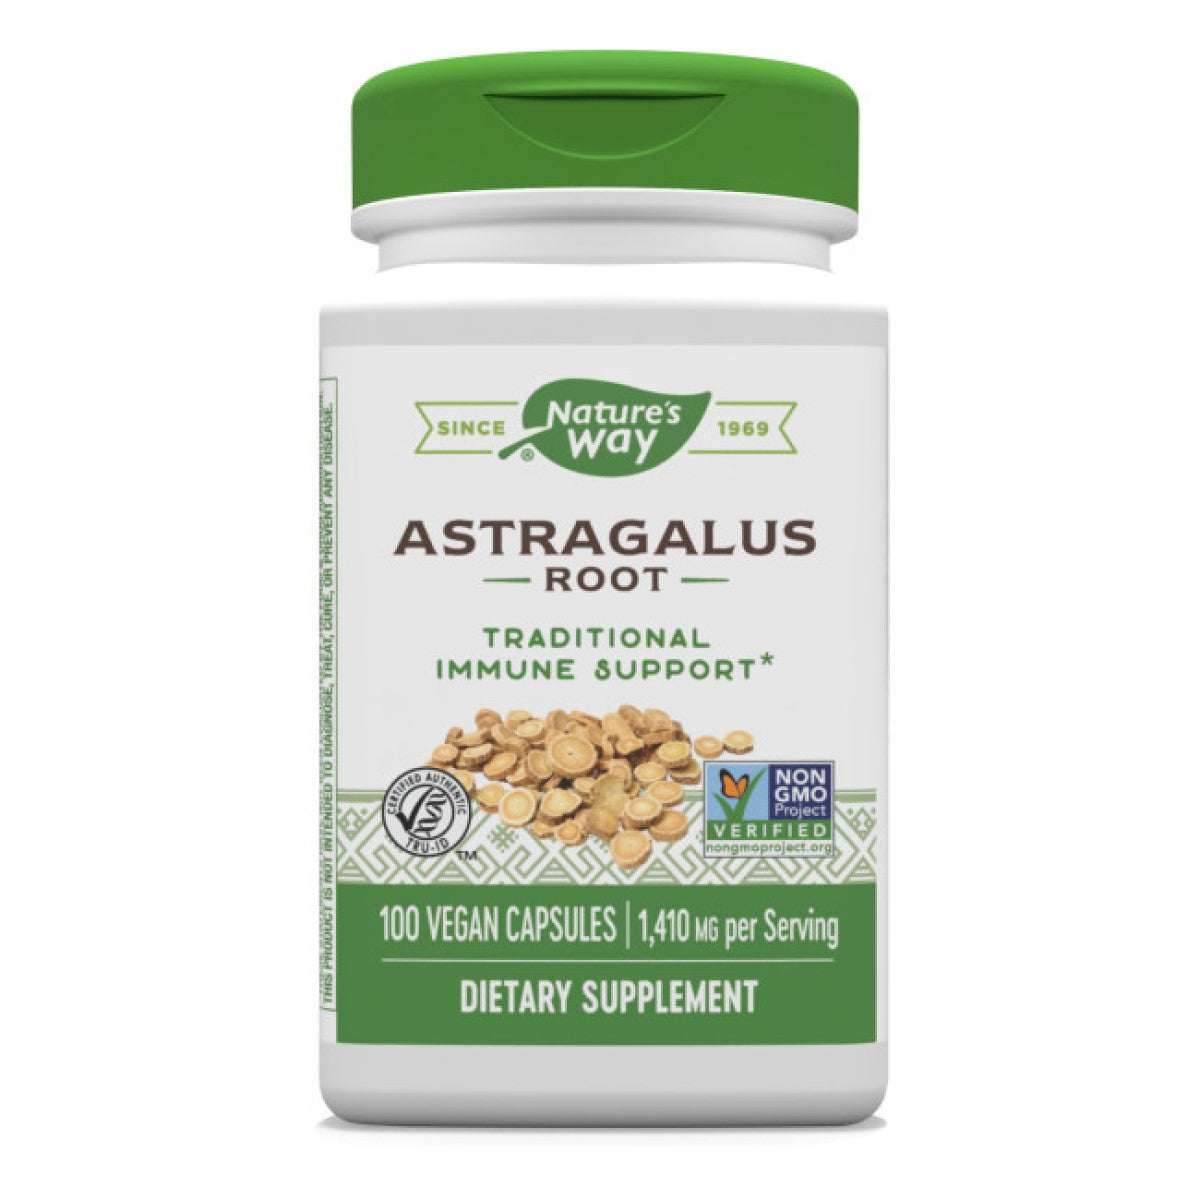 Primary image of Astragalus Root